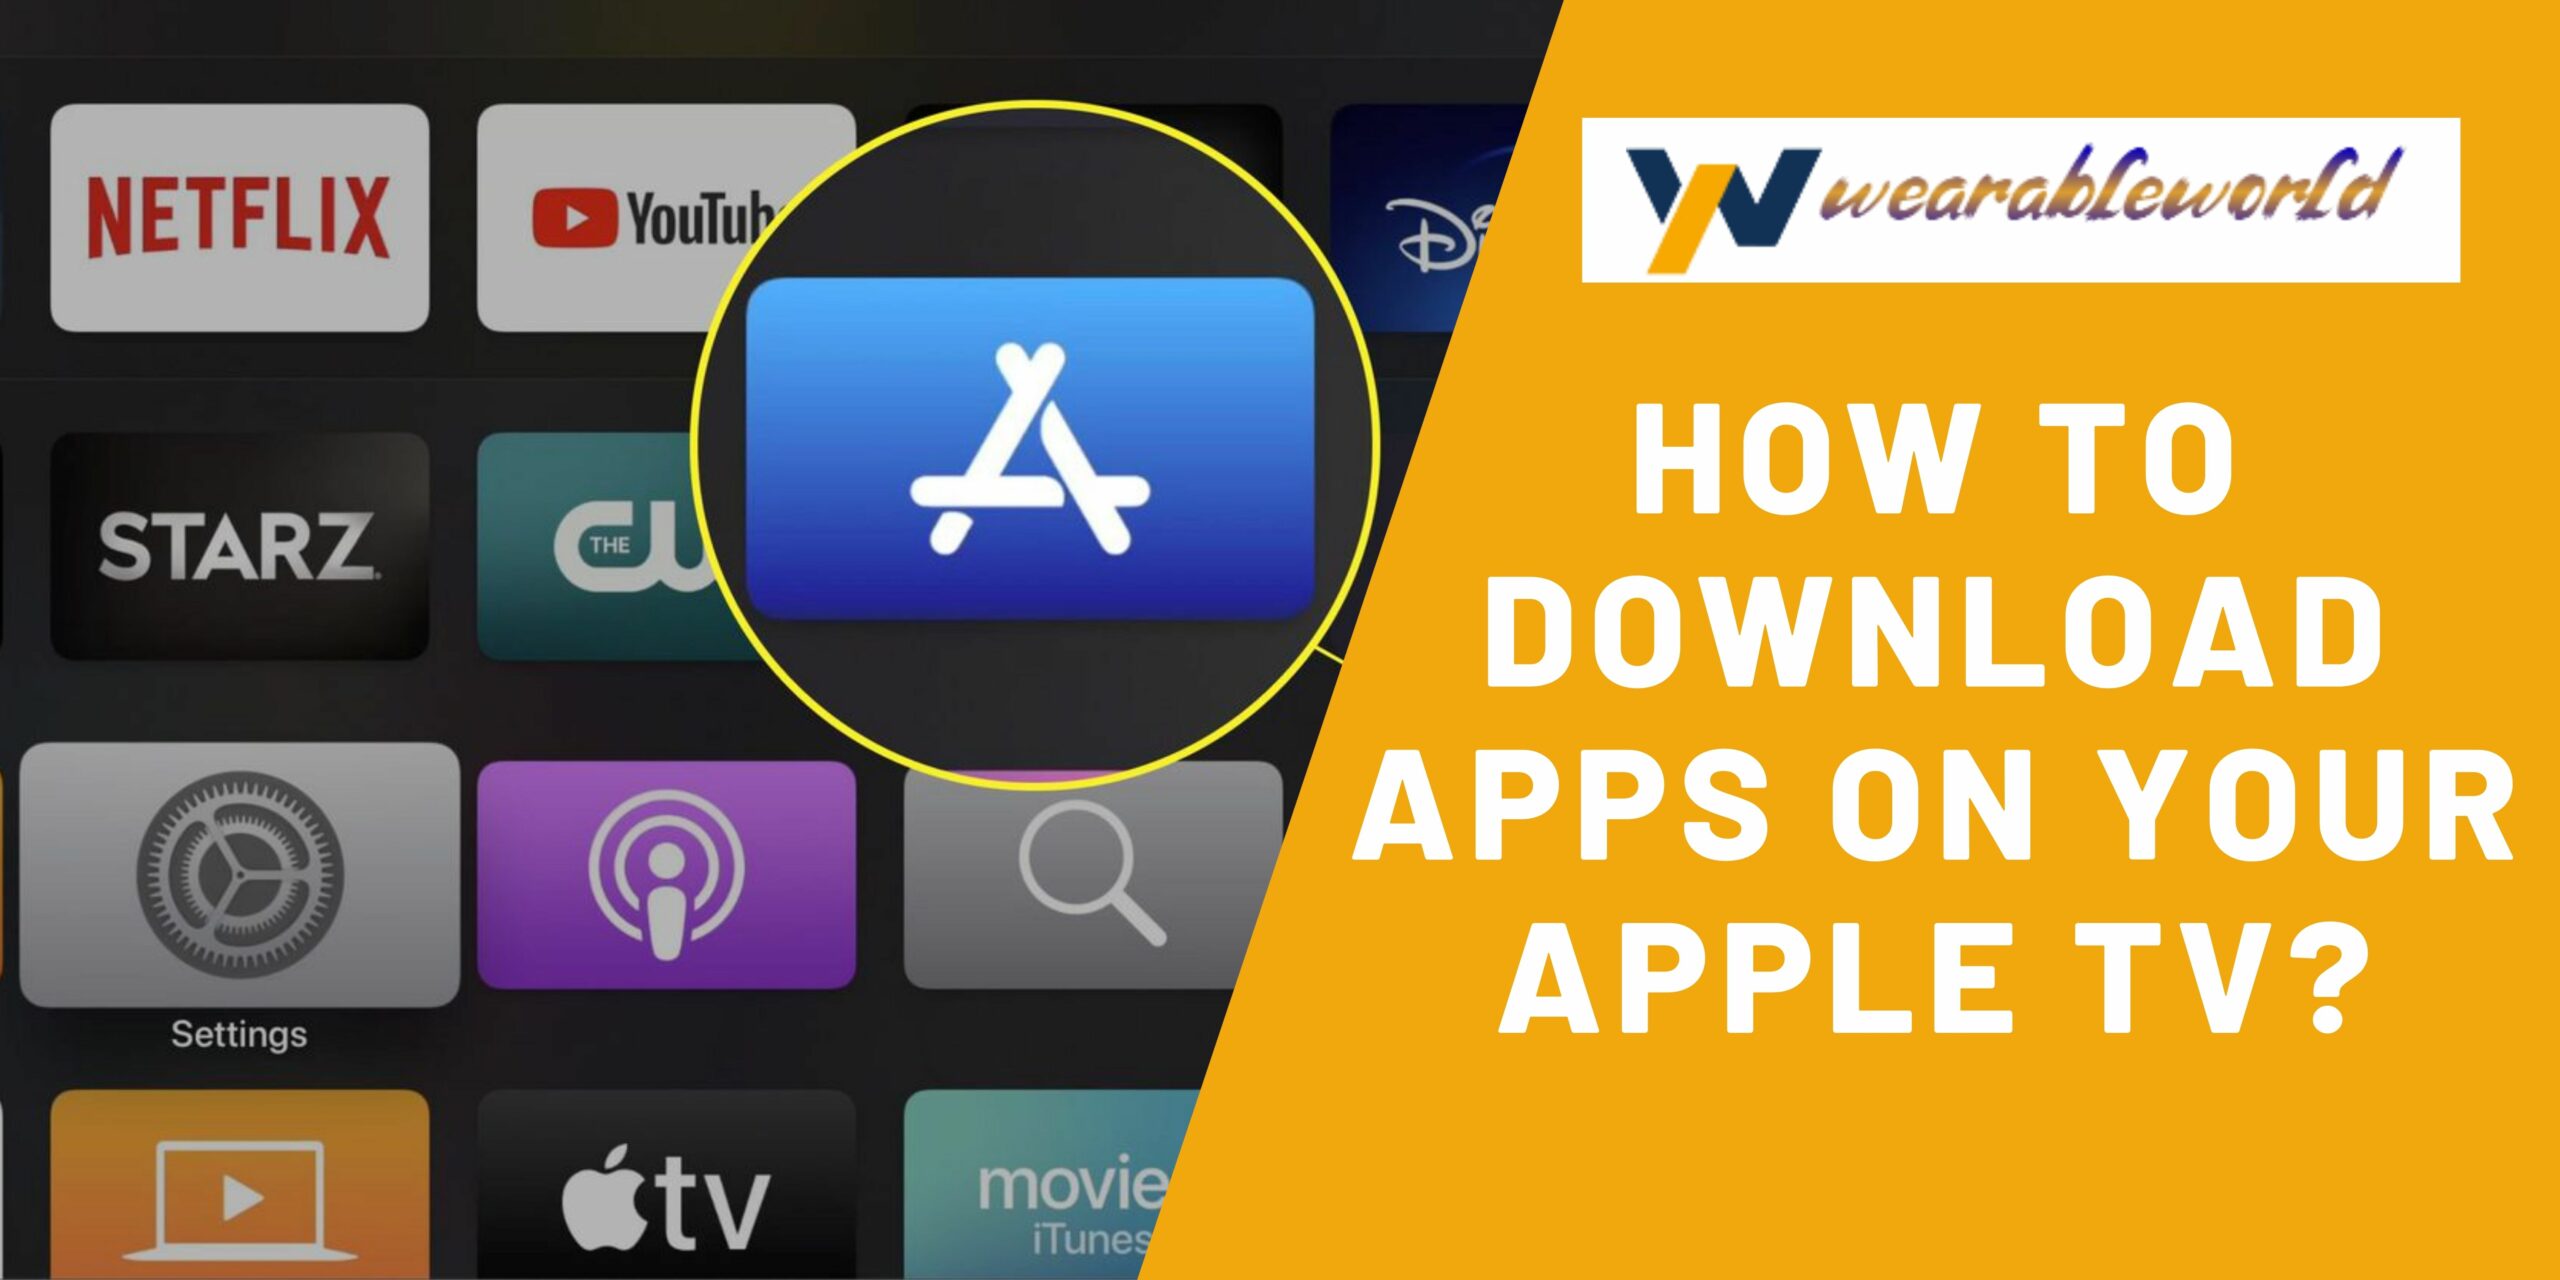 Download apps on your Apple TV